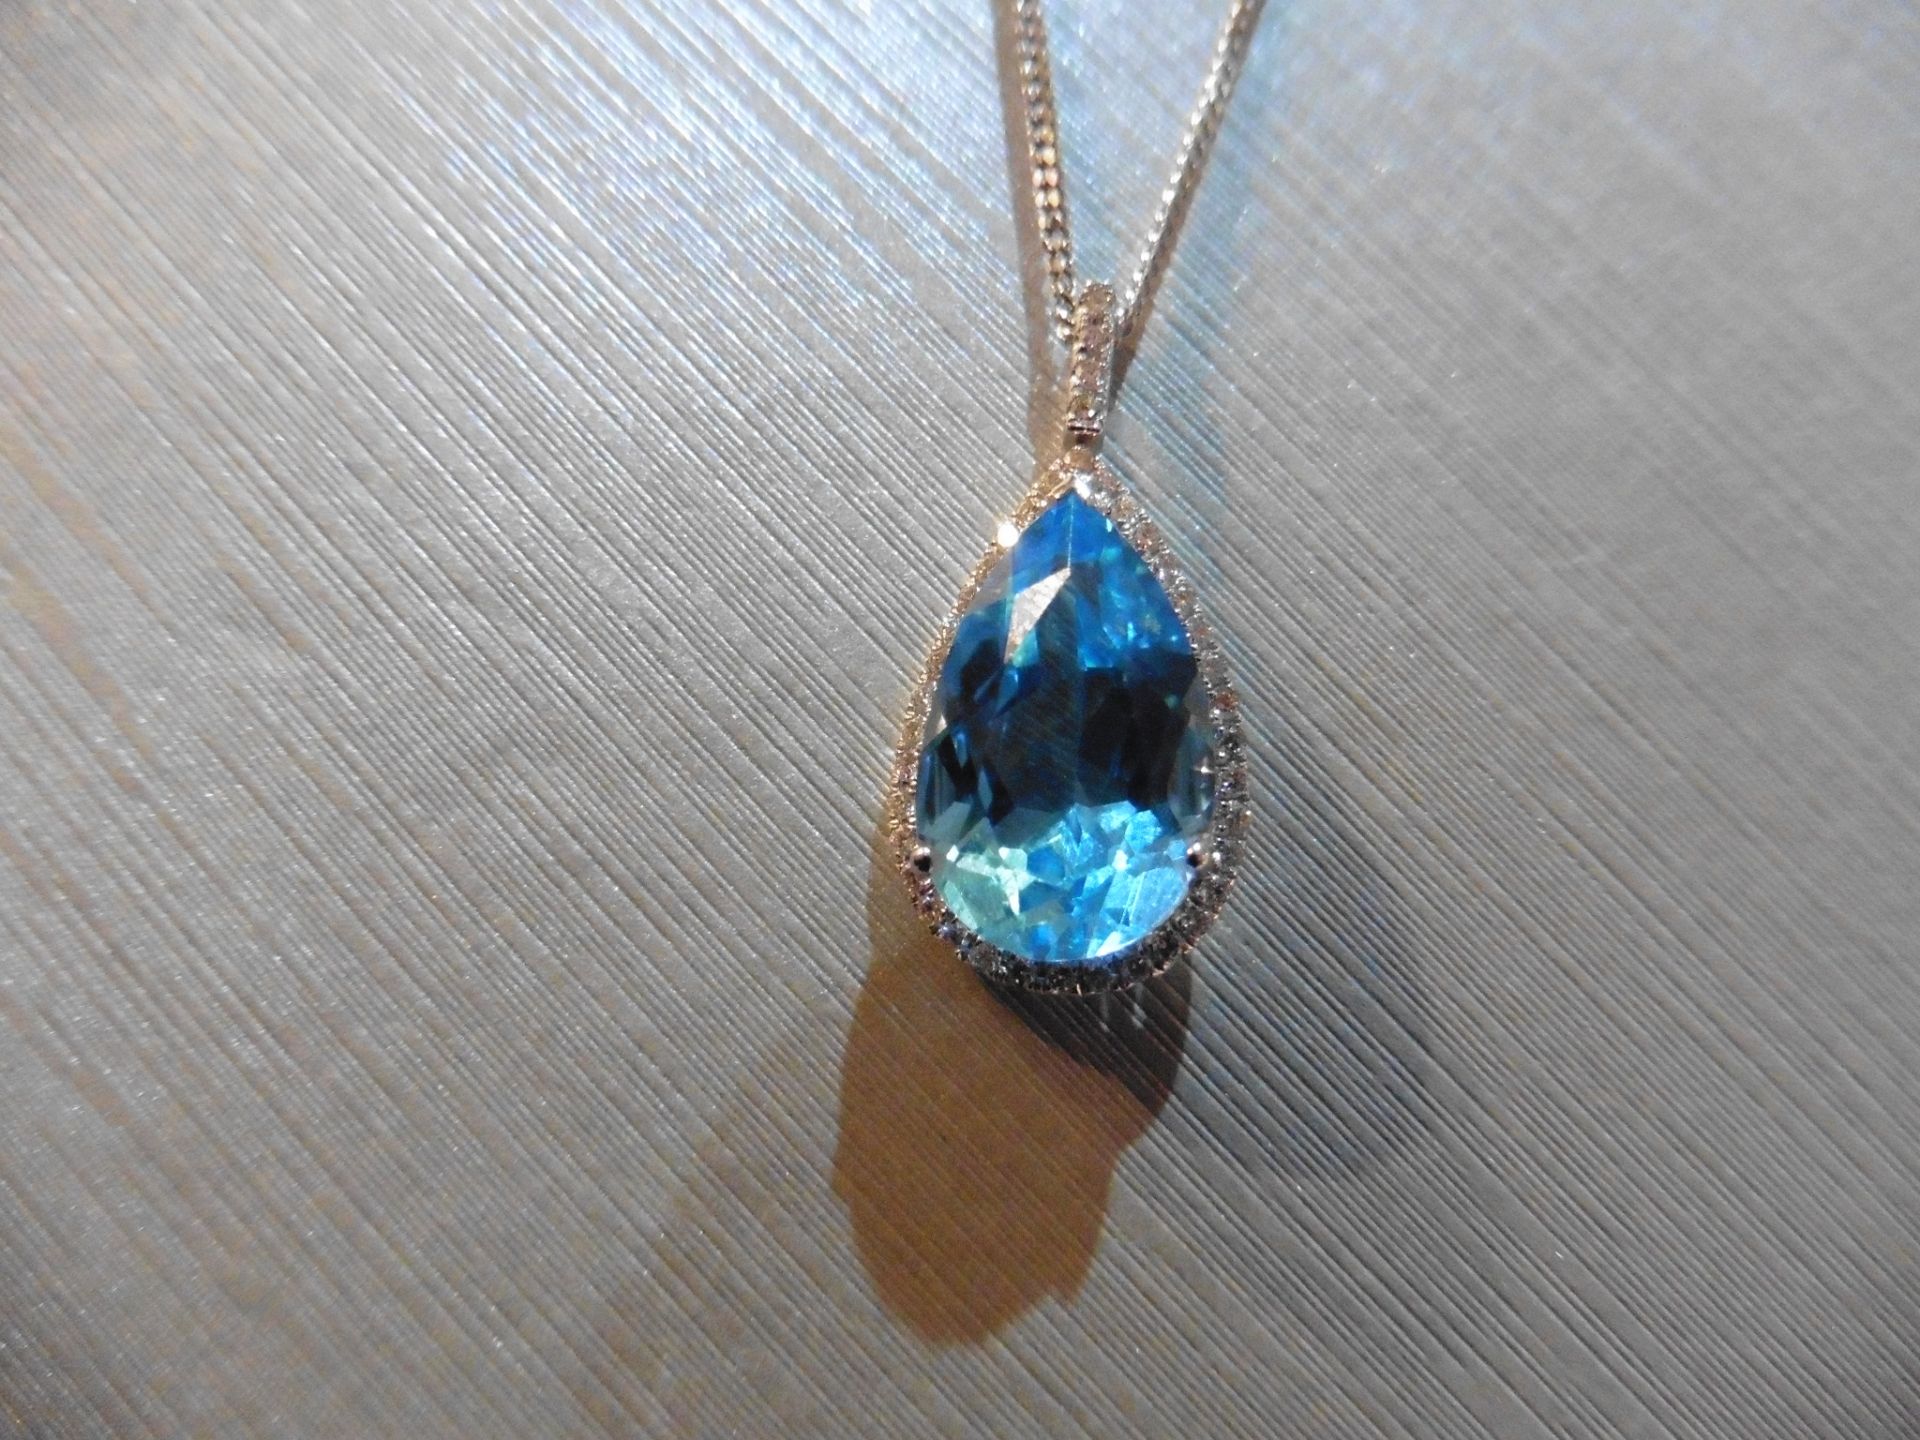 Brand new 9ct white gold blue topaz and diamond pendant. Set with a pear shaped blue topaz